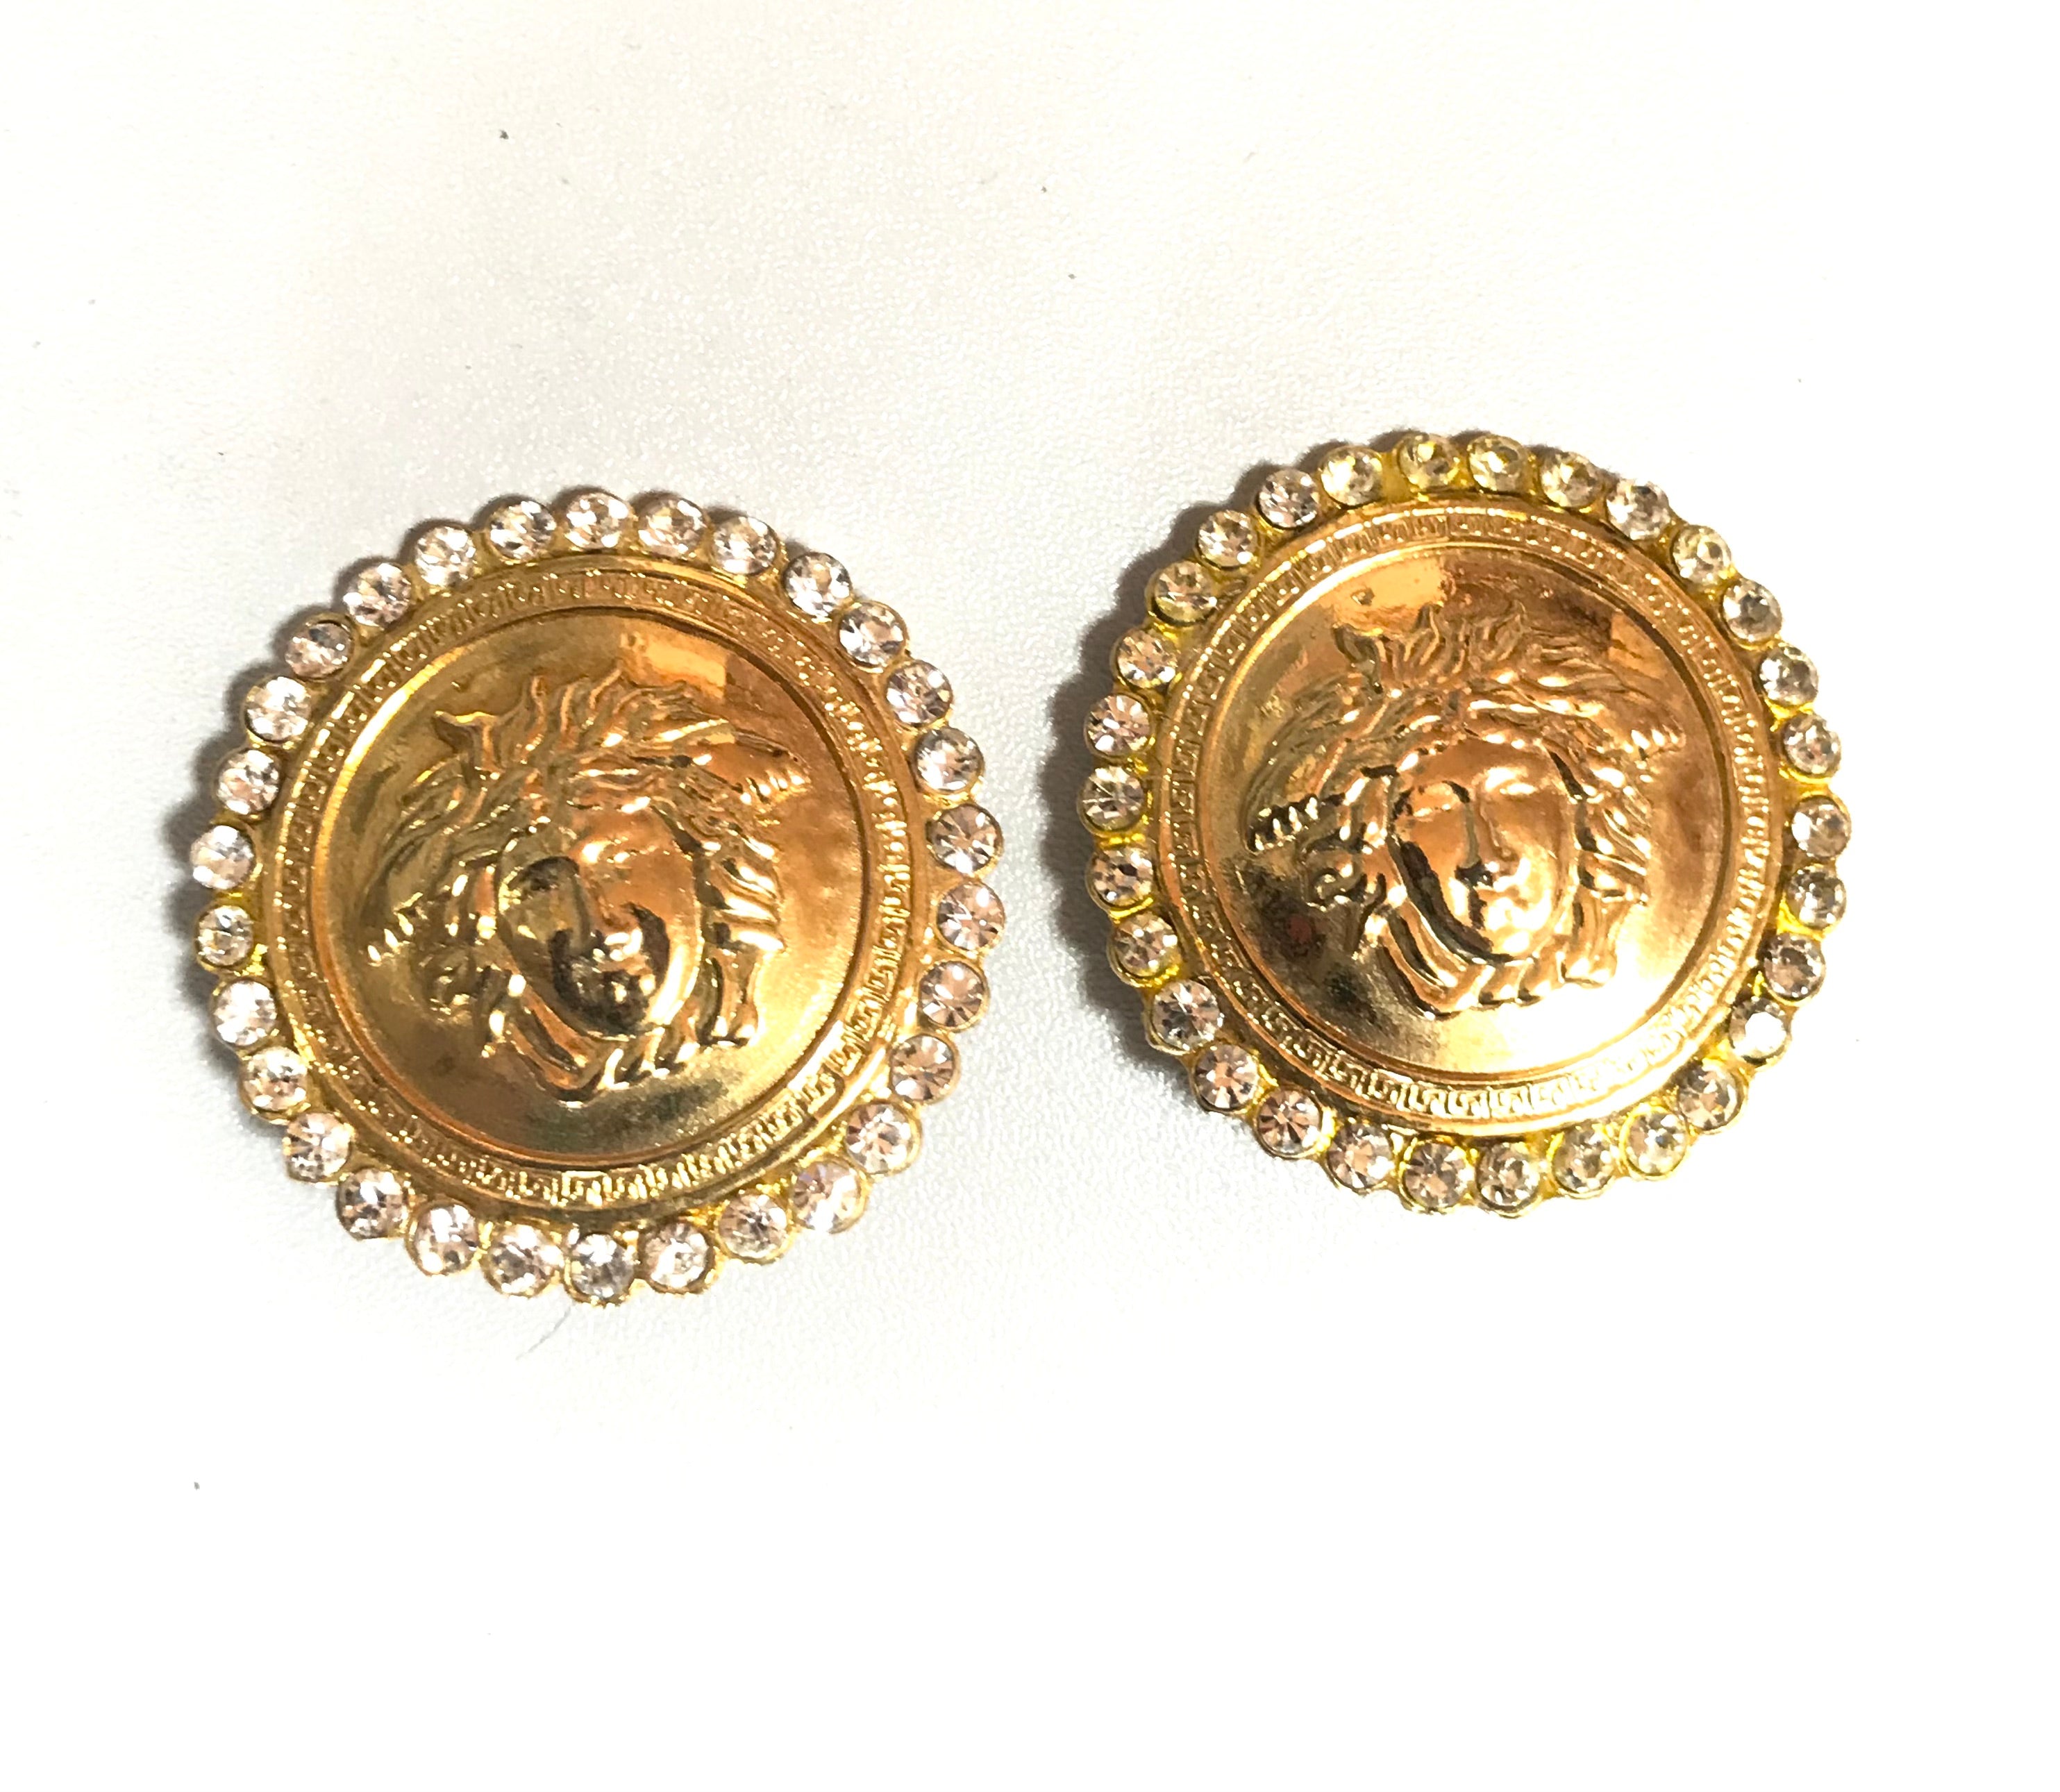 Vintage Gianni Versace large round gold tone medusa face earrings with crystal glasses. Must have Lady Gaga style jewelry piece.